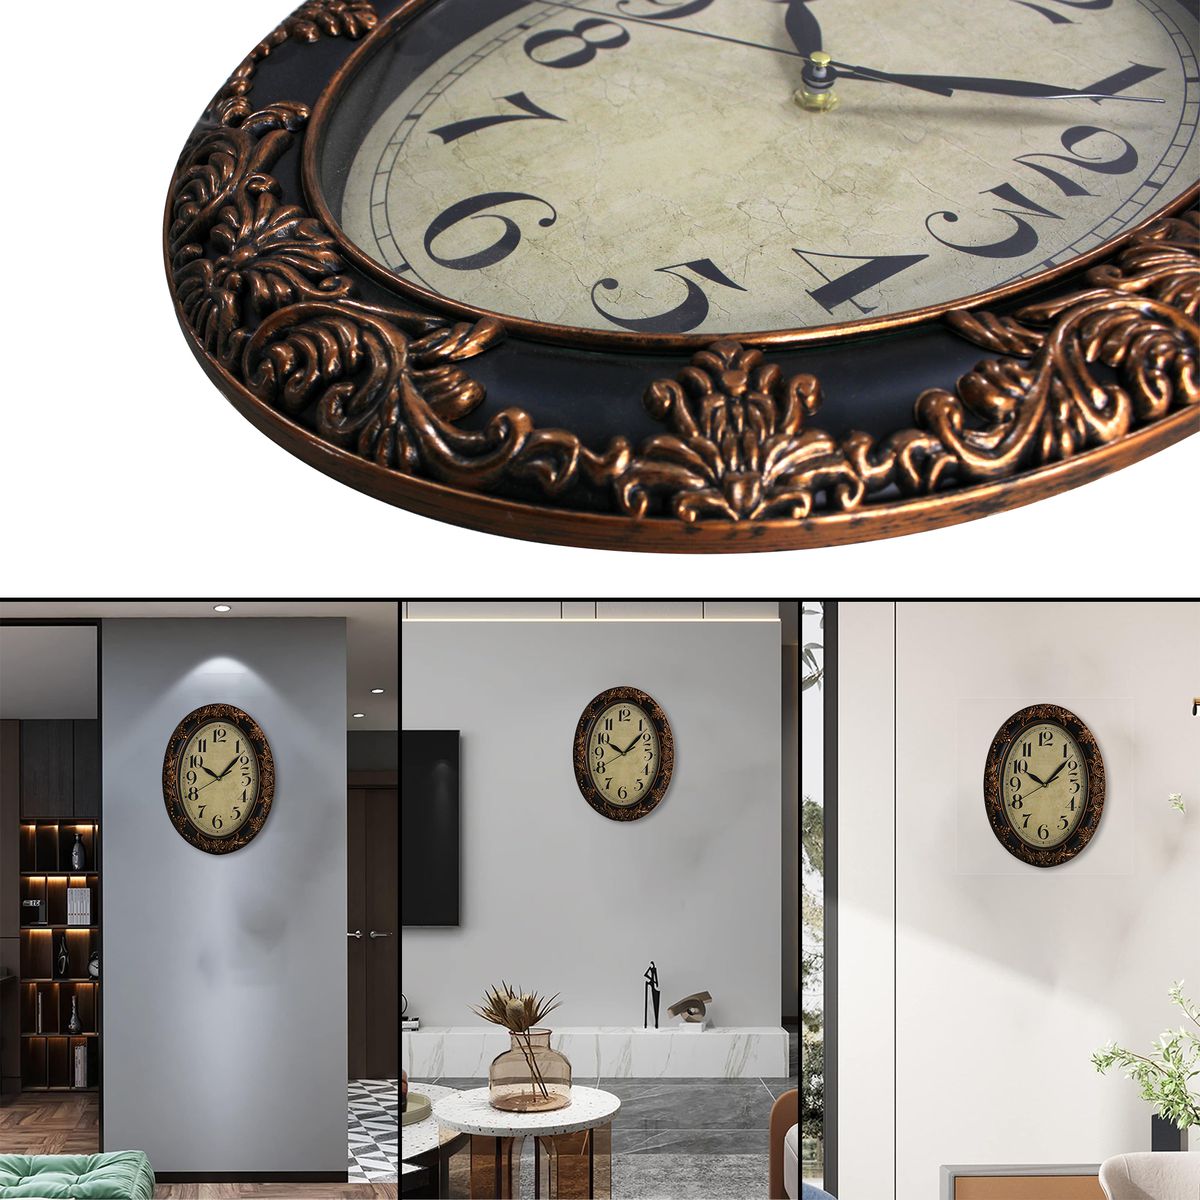 Ornate Border 34x26cm Oval Analogue Wall Clock with Anrique Motif - 012